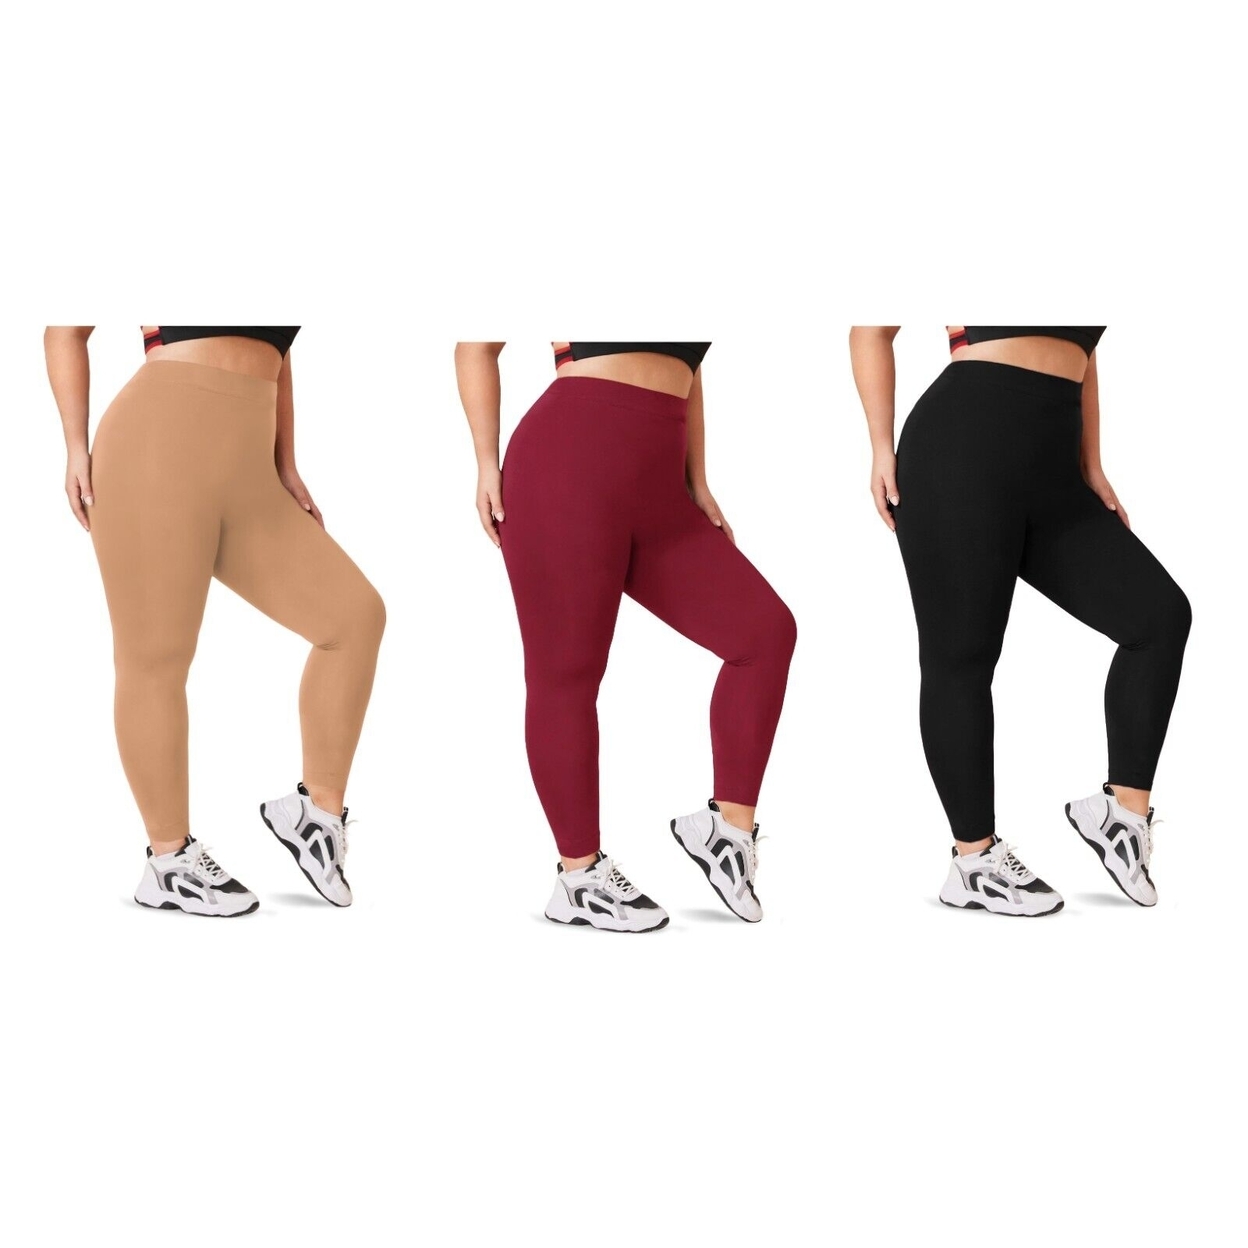 Multi-Pack: Women's Casual Ultra-Soft Smooth High Waisted Athletic Active Yoga Leggings Plus Size Available - 3-pack, 2x